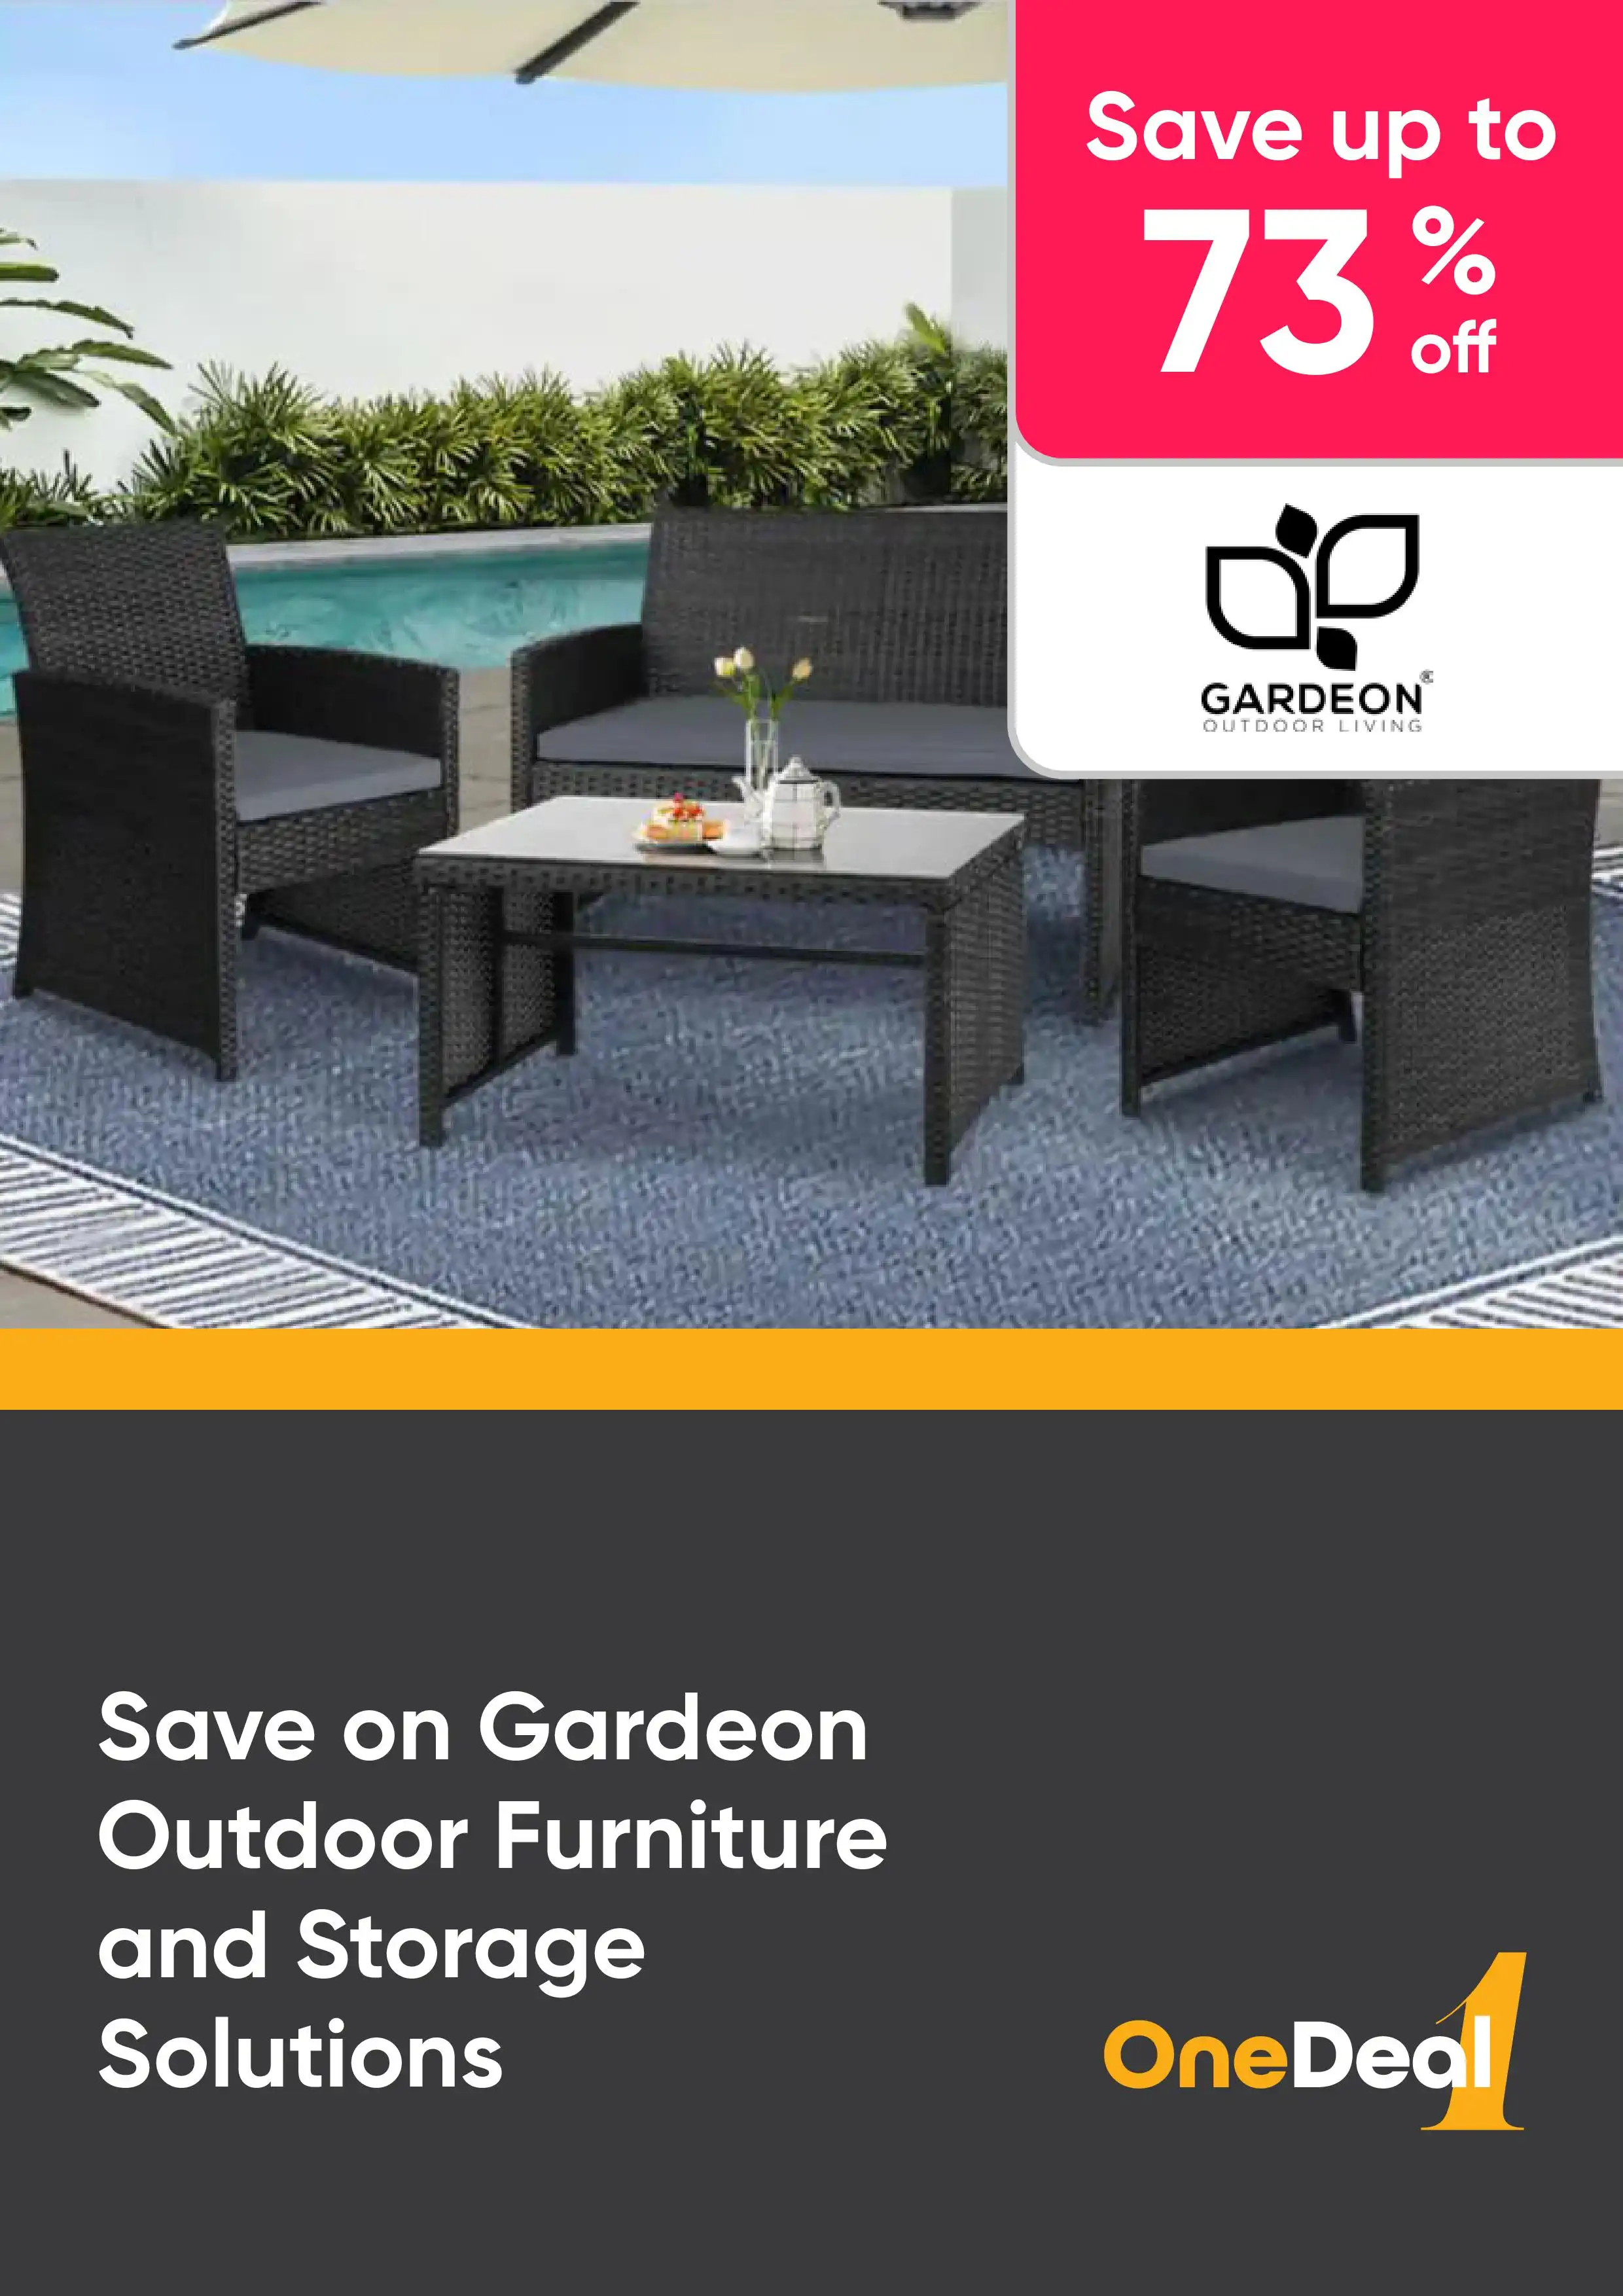 Save on Garden Outdoor Furniture and Storage Solutions - Up to 73% Off RRP